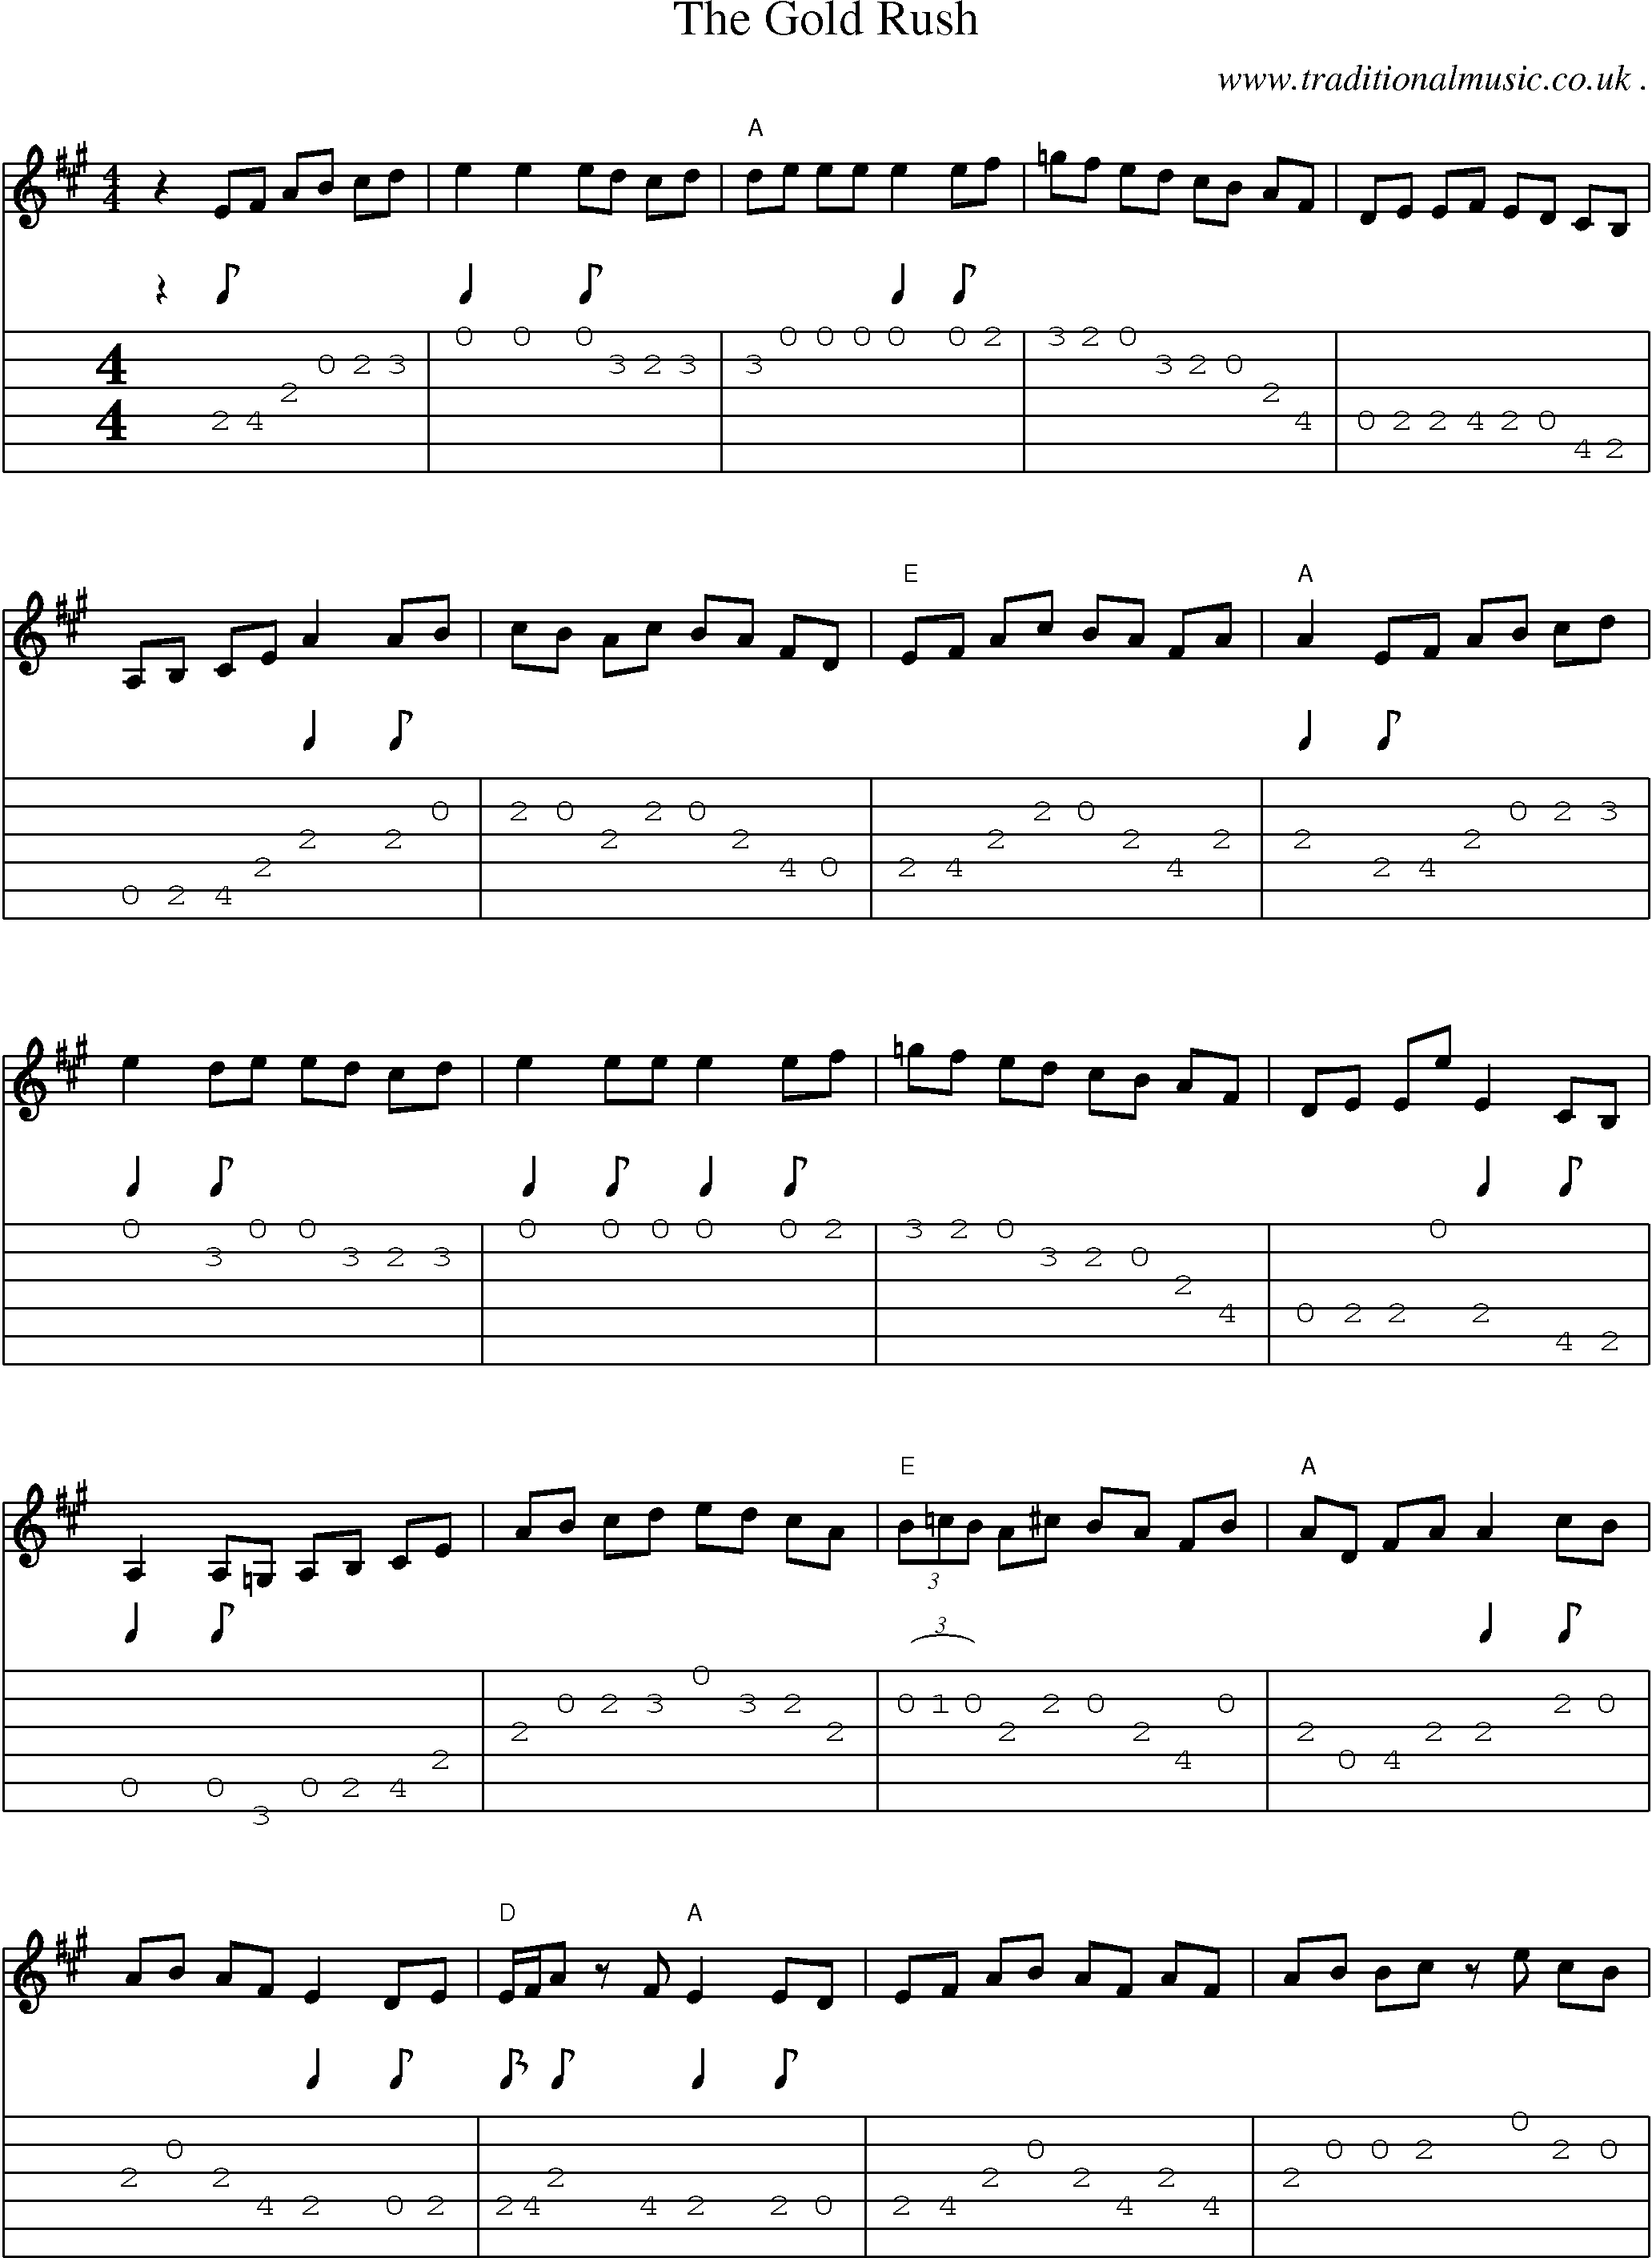 Music Score and Guitar Tabs for The Gold Rush